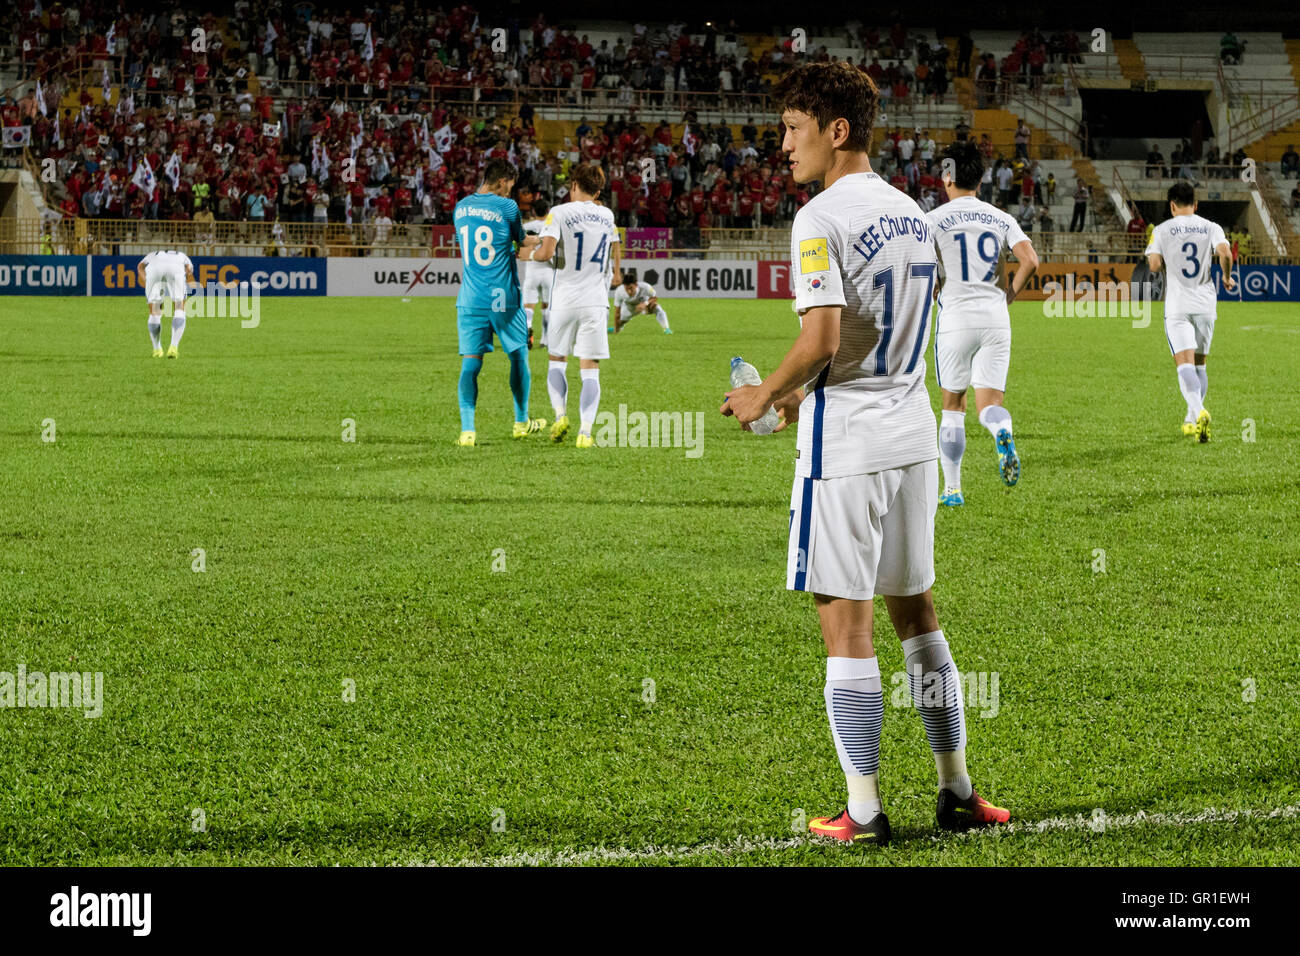 Seremban, Malaysia. 6th September, 2016. Lee Chung Yong of South Korea (C) entering to playground during the 2018 FIFA World Cup qualifying football match between South Korea and Syria at Tuanku Abdul Rahman Stadium in Seremban on September 6, 2016. Credit:  Chris JUNG/Alamy Live News Stock Photo